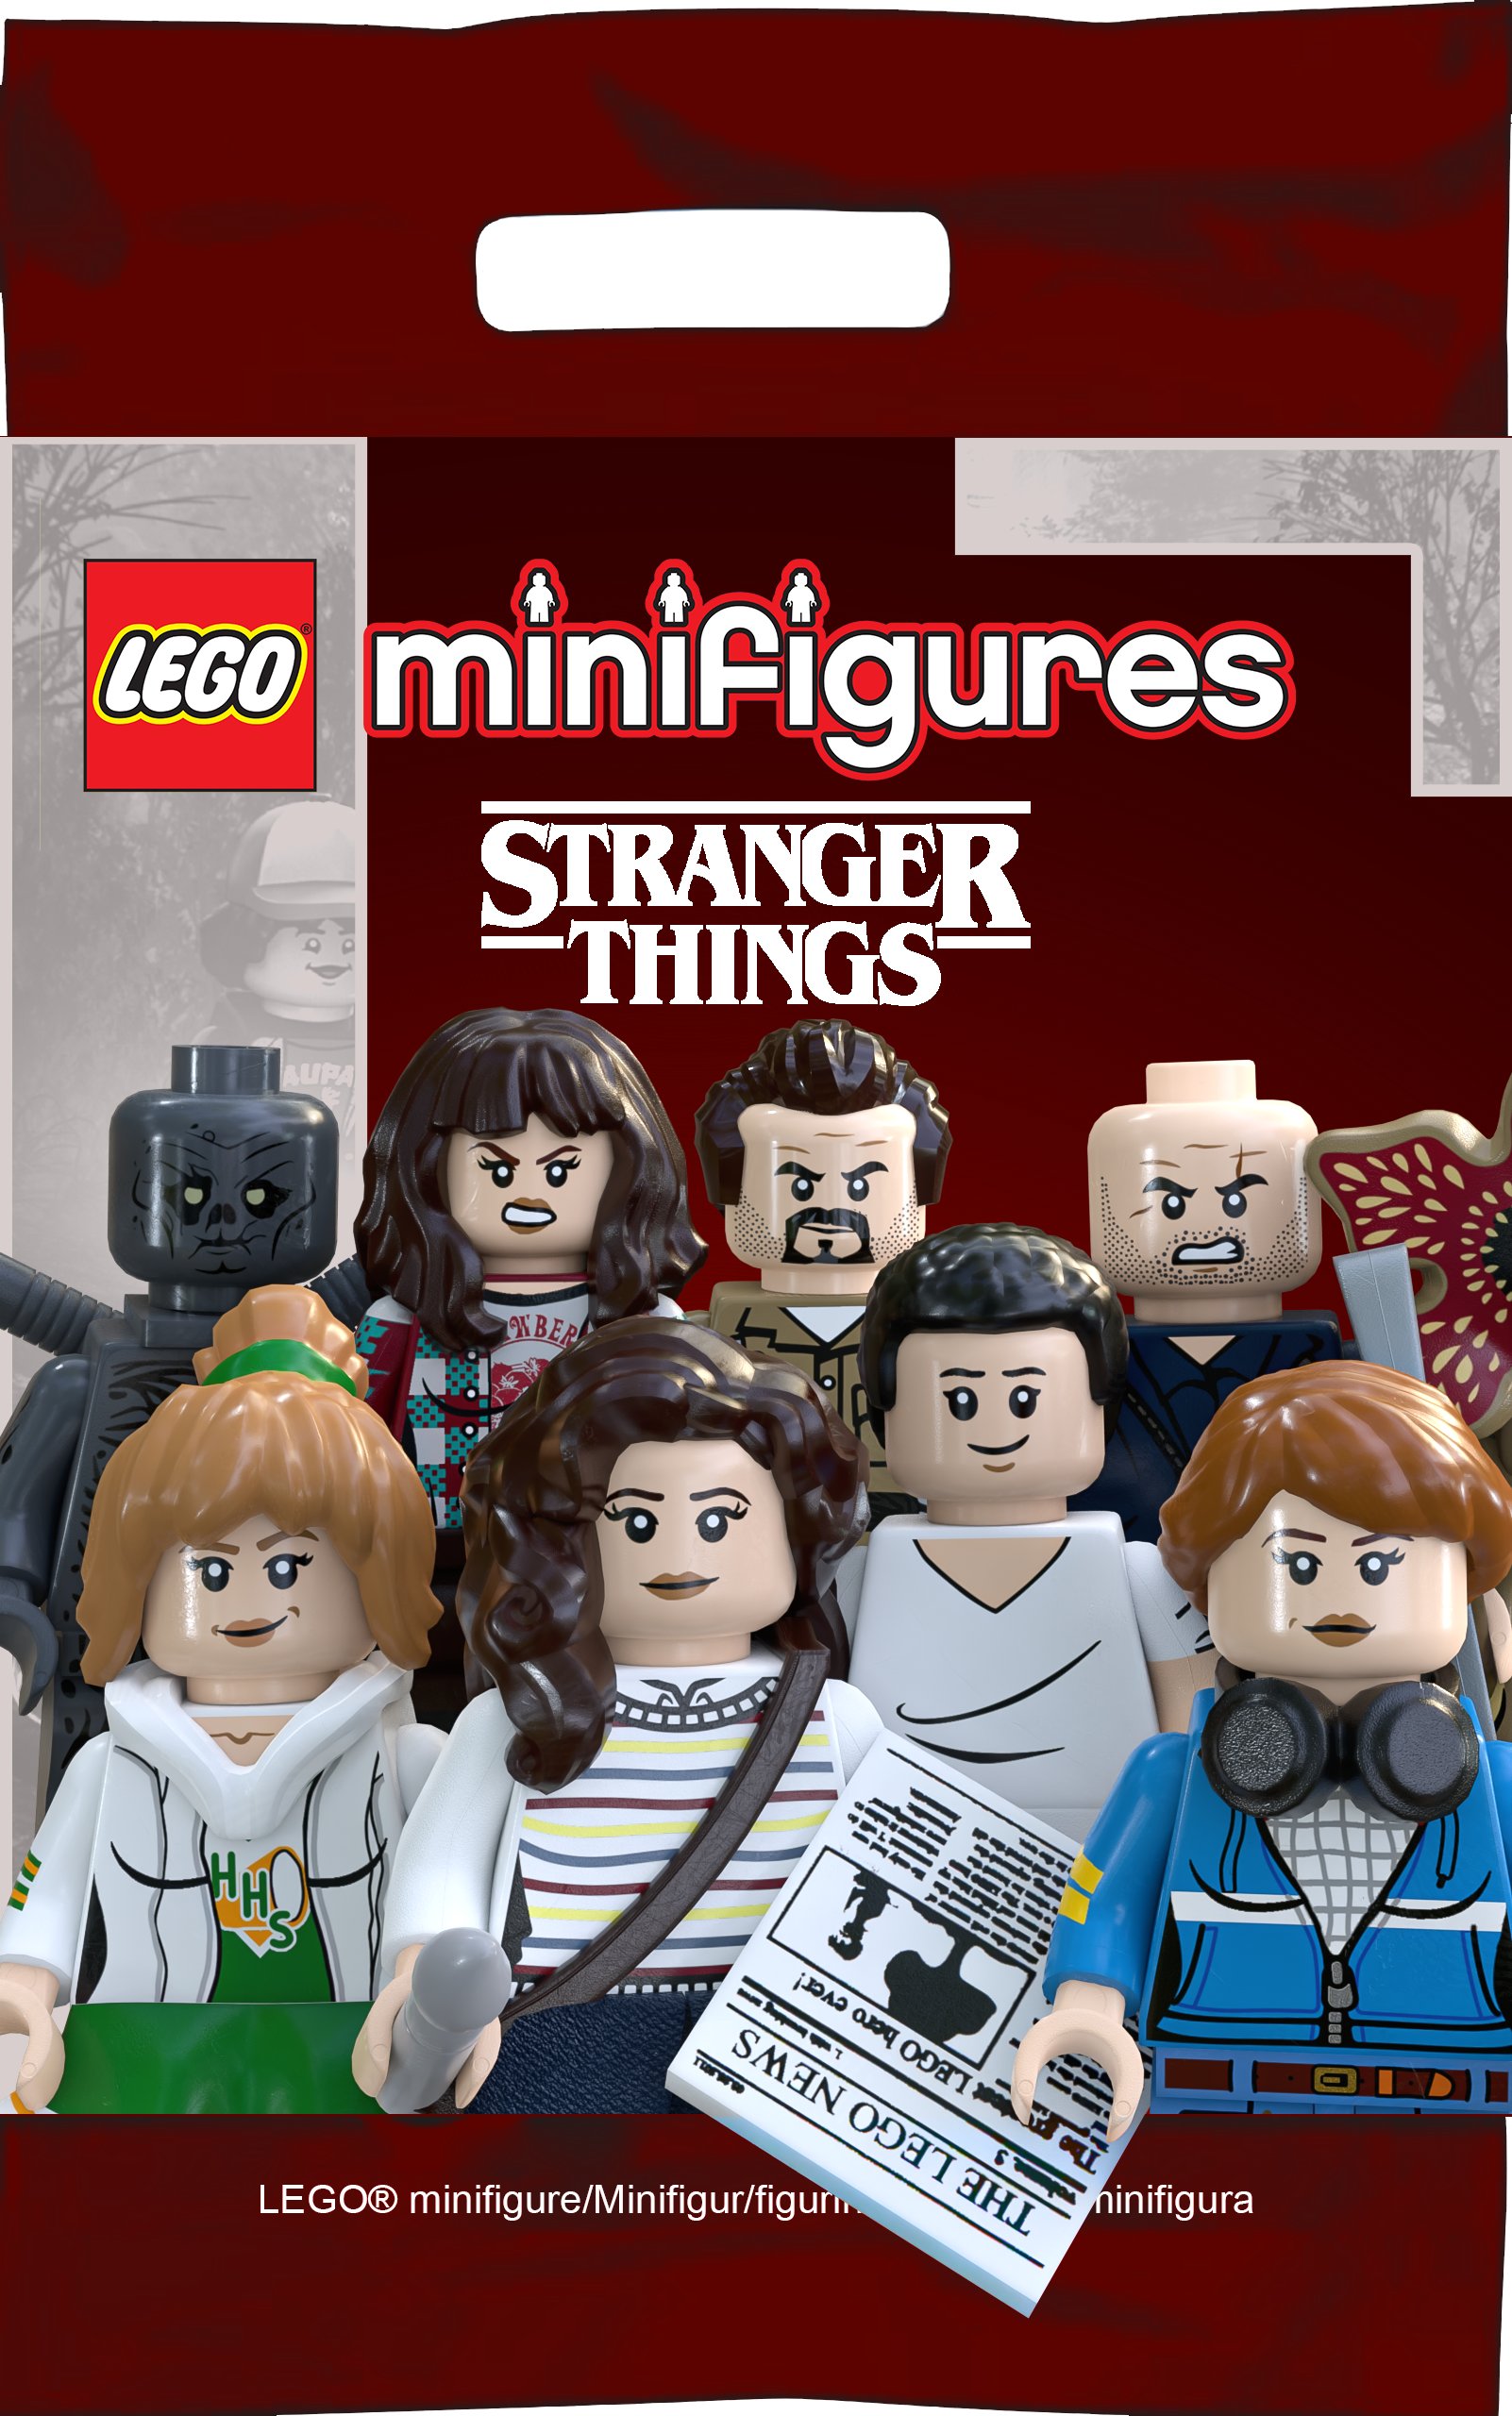 DEVINK™ Kirill on Twitter: - Stranger Things Custom Collectible Minifigure Series🔥 What do you think? Write down your favourite minifigure⬇️ @LEGO_group @GraceVanDien @mayahawke #LEGO #StrangerThings4 ...